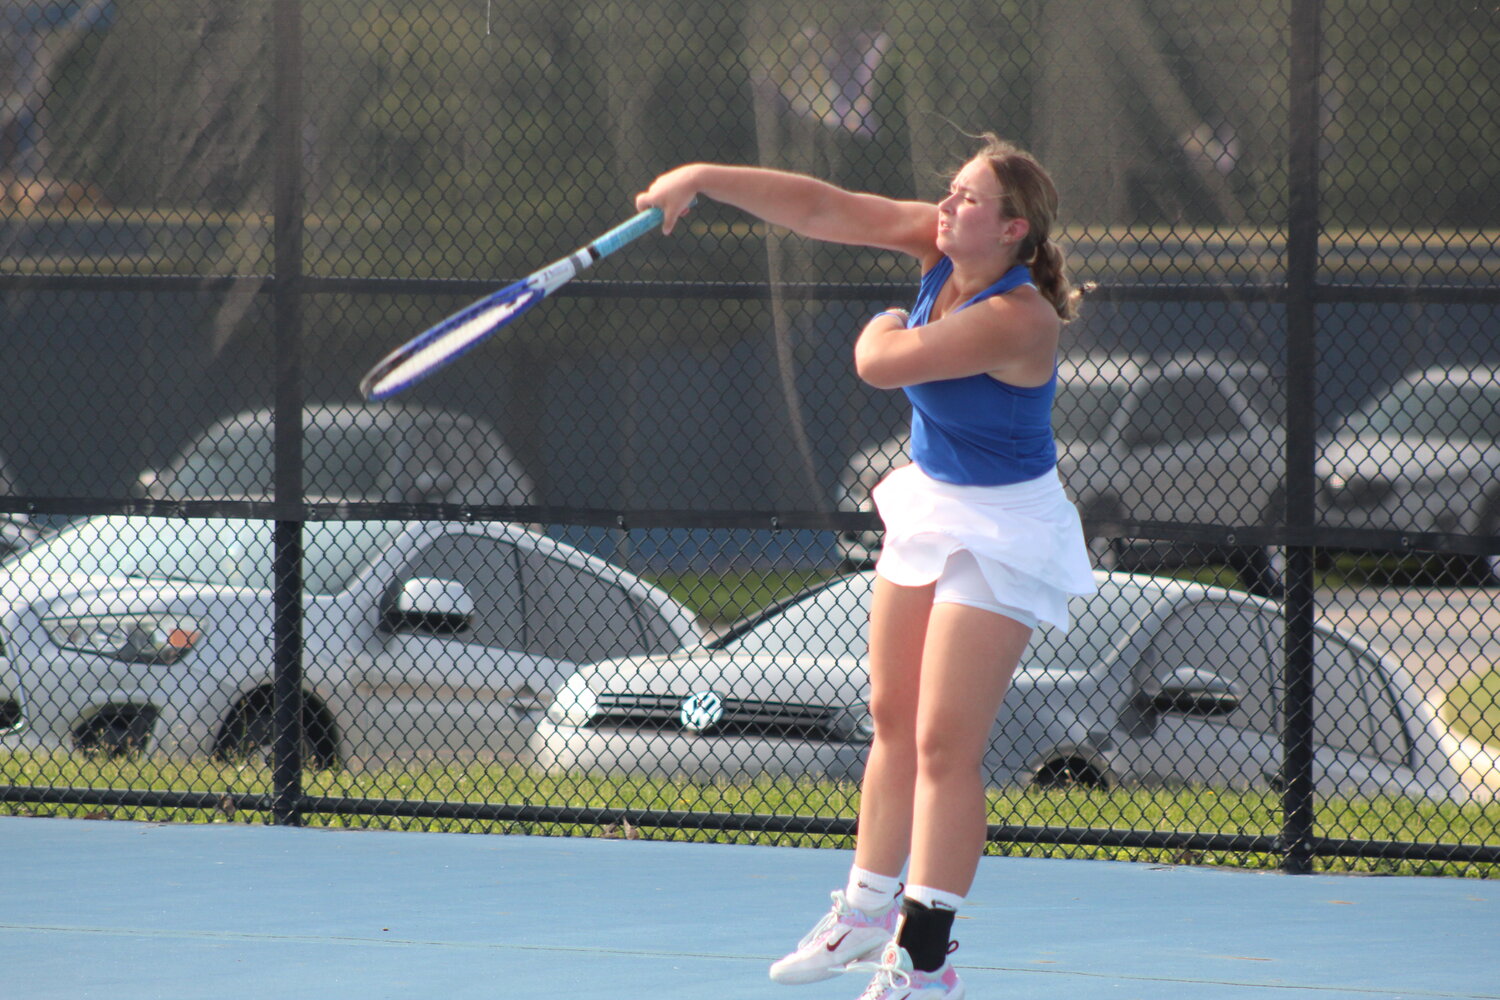 Crawfordsville's Sam Rohr played some of her best tennis in a three set loss to Parke Heritage's Laure Hansmann.